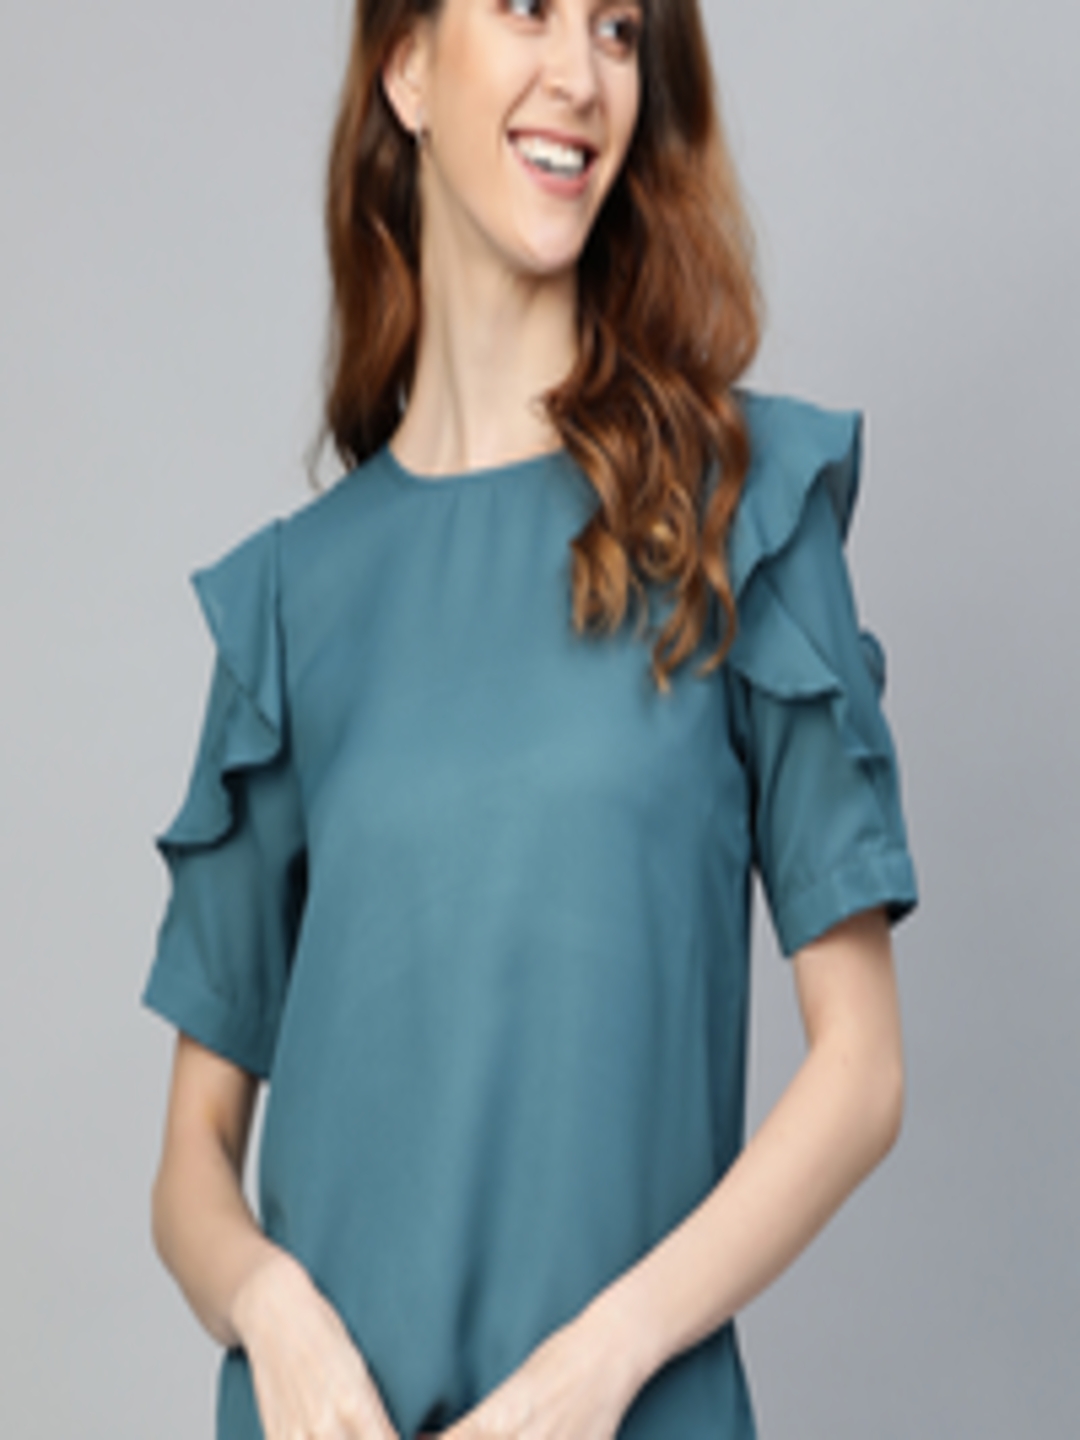 Buy Mast & Harbour Women Teal Blue Ruffled Solid Top - Tops for Women ...